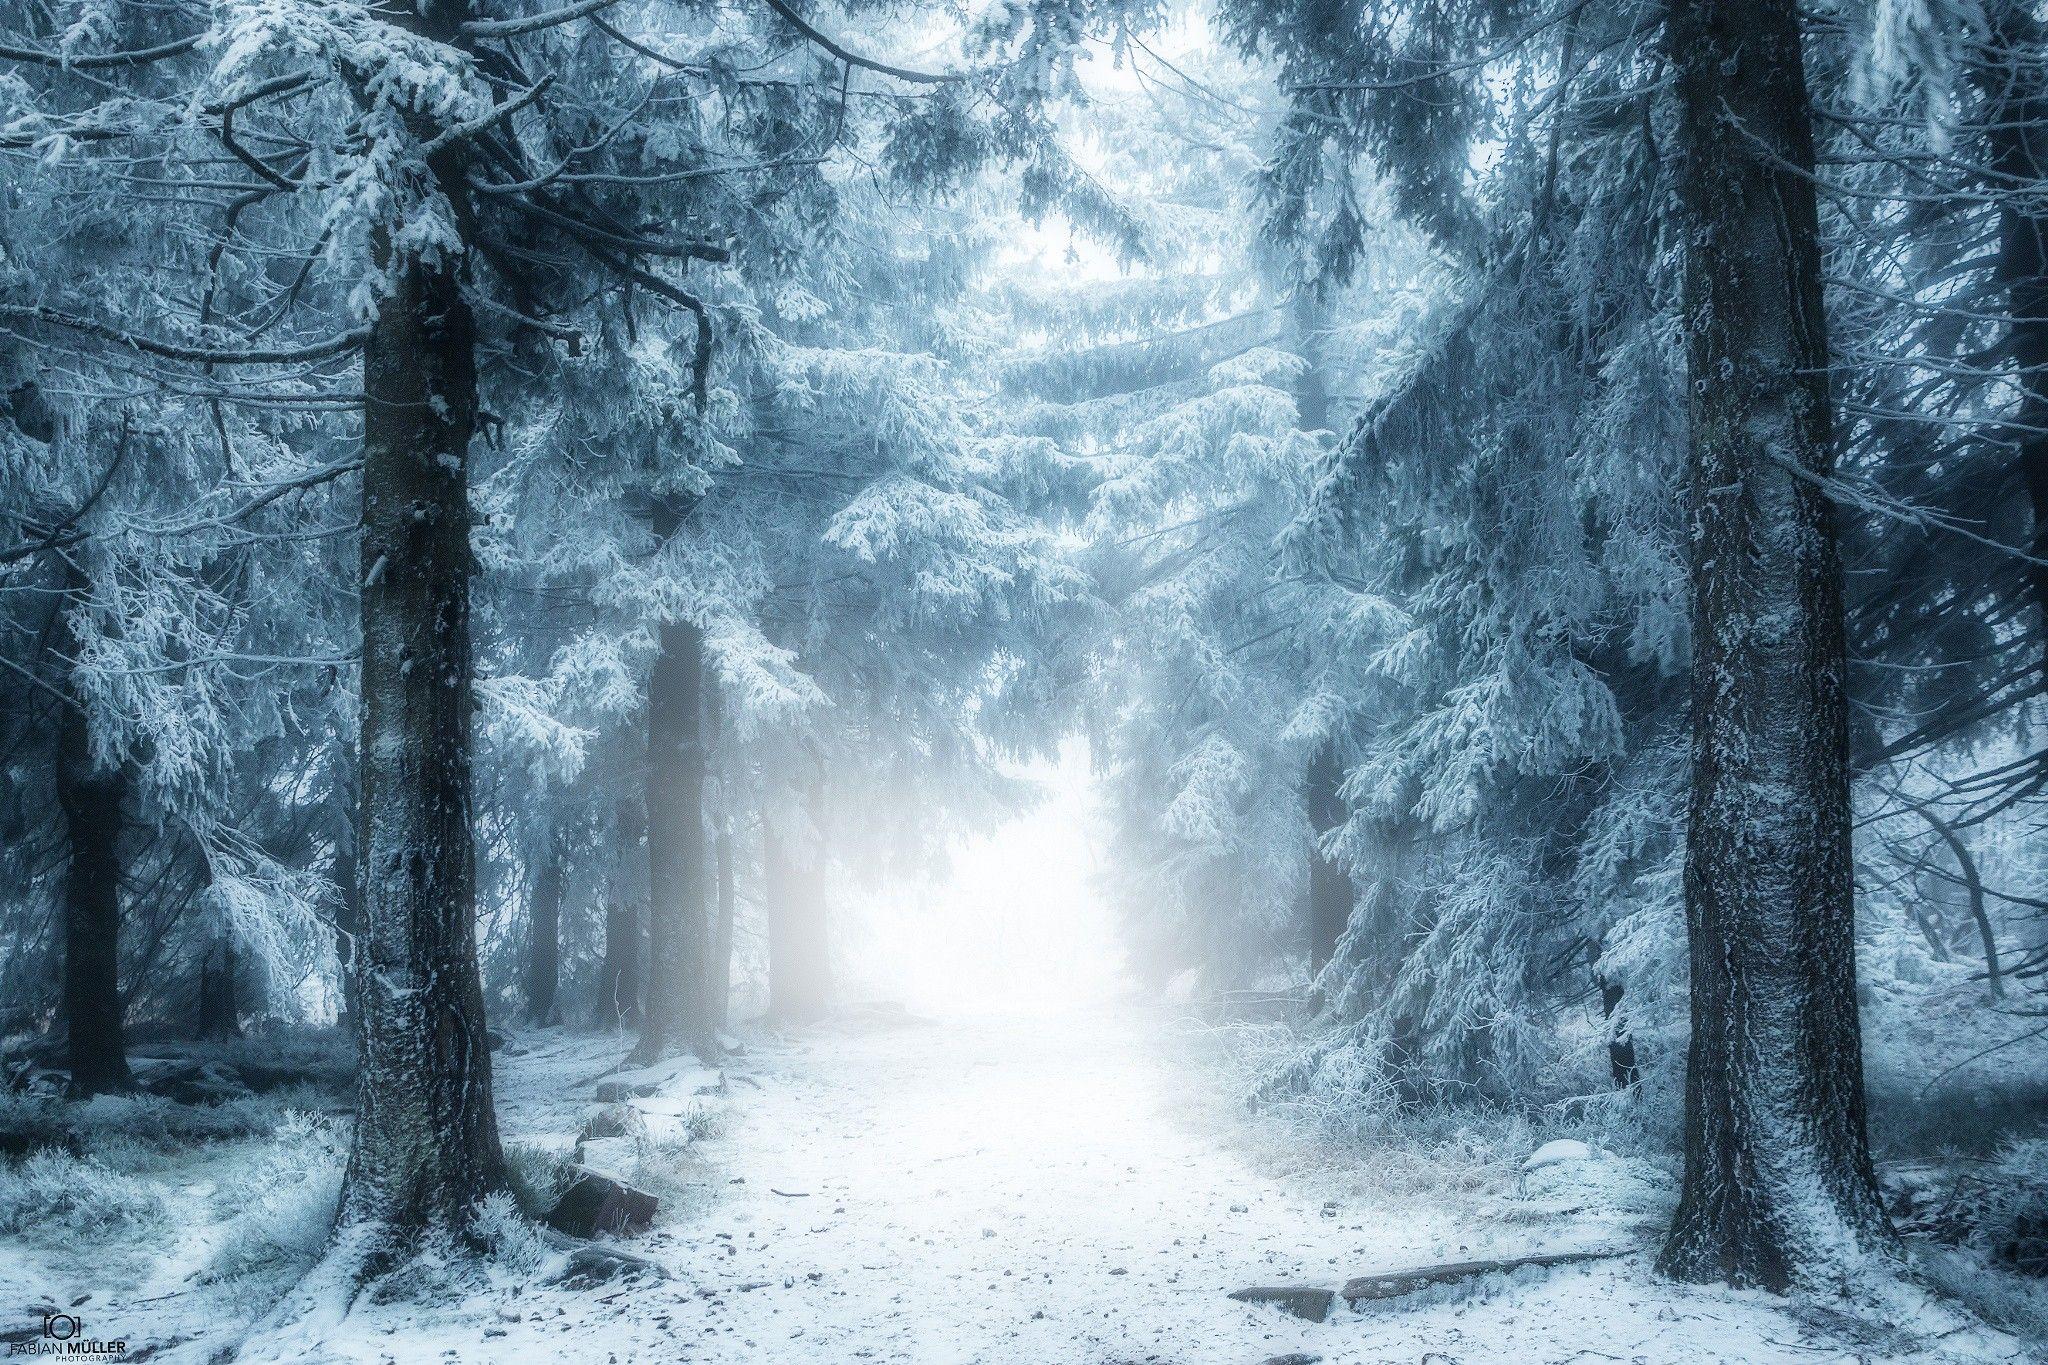 Winter: Winter Forest Snow Time Snowy Nature Woods HDR Wallpaper